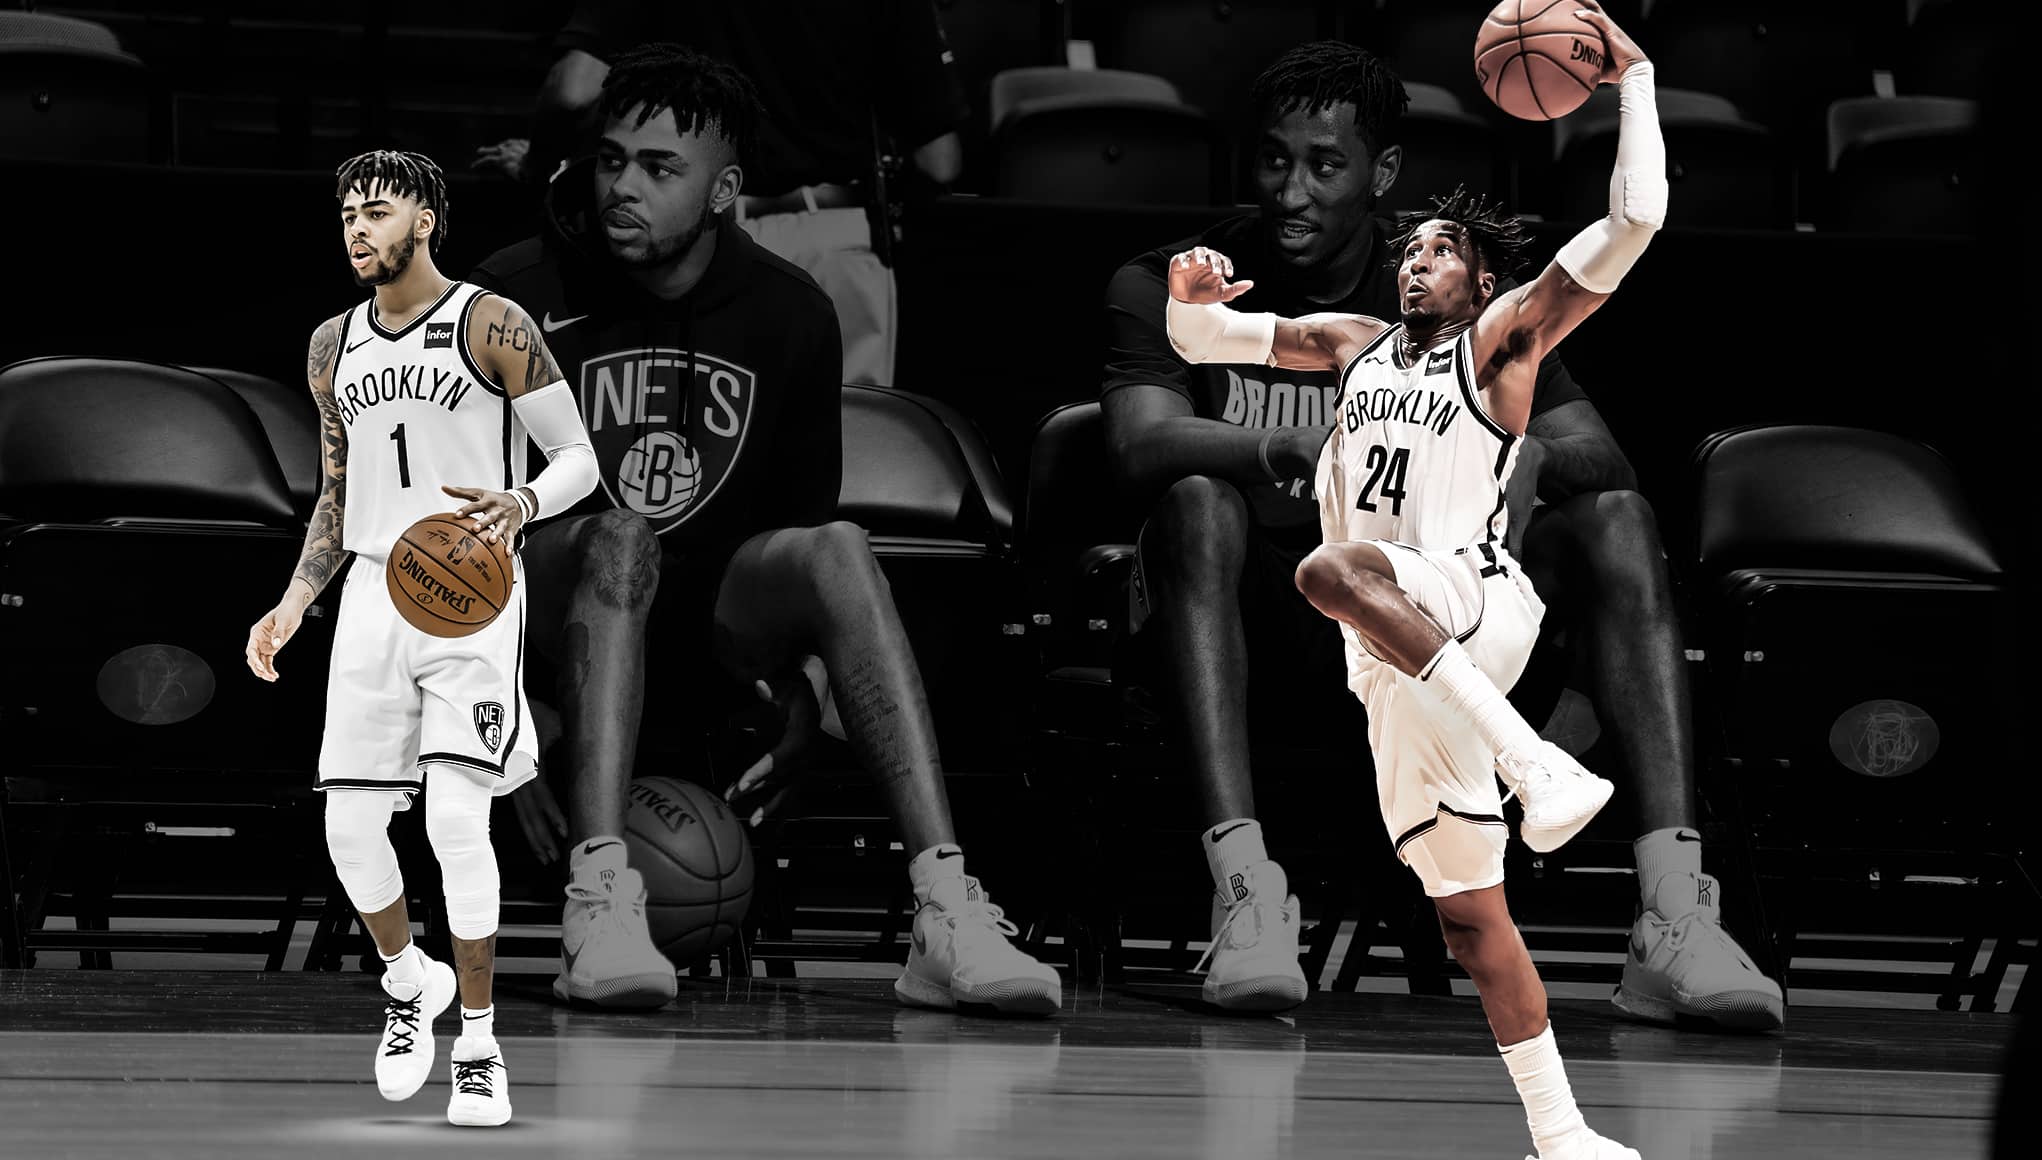 D'Angelo Russell and Rondae Hollis-Jefferson